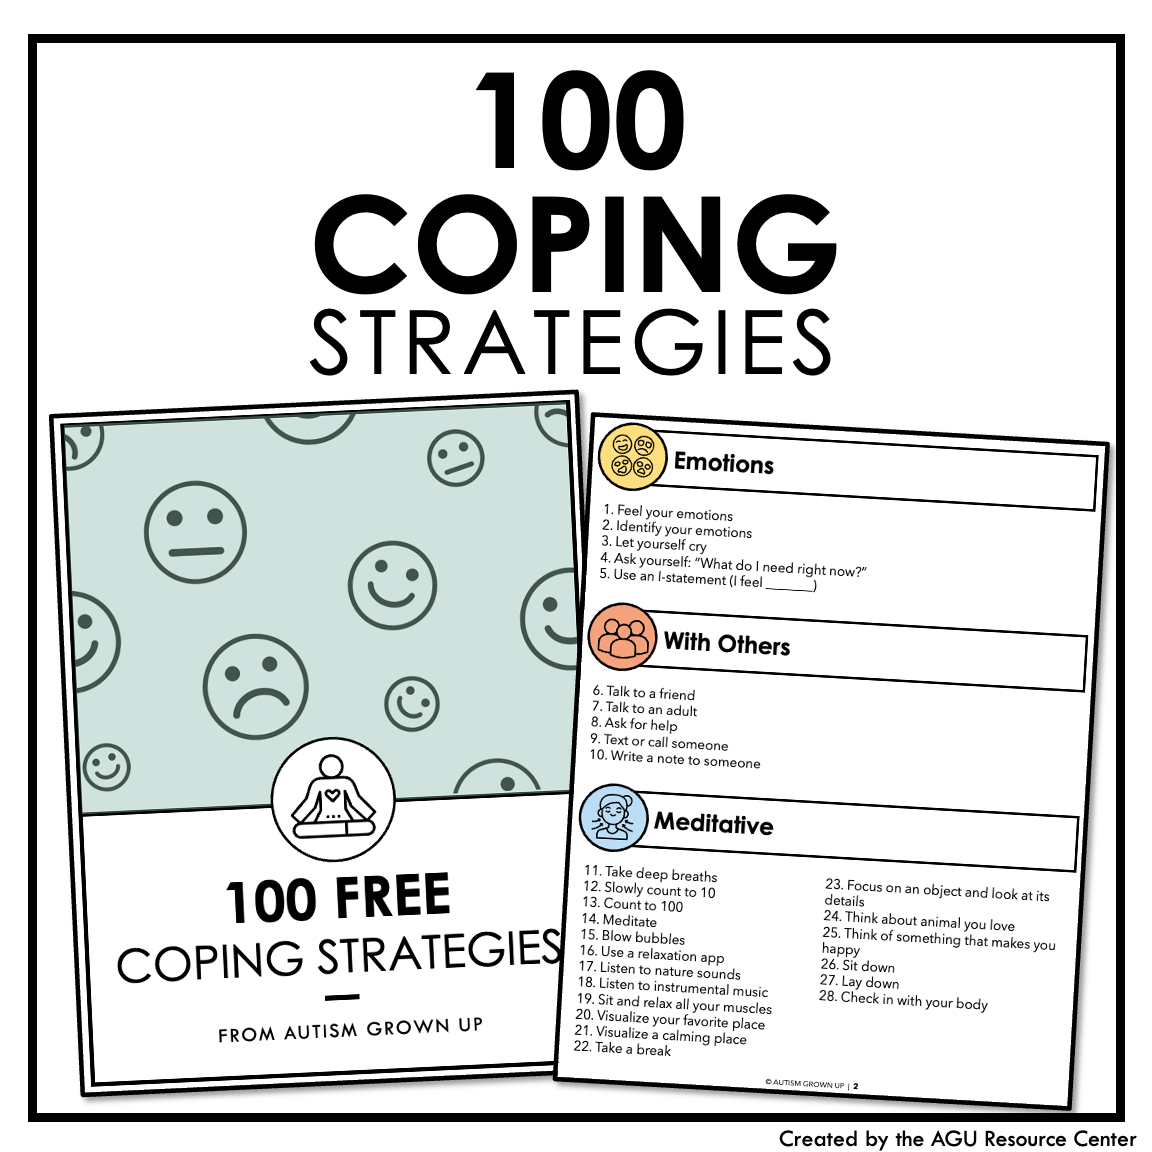 More Free Resources for Caregivers